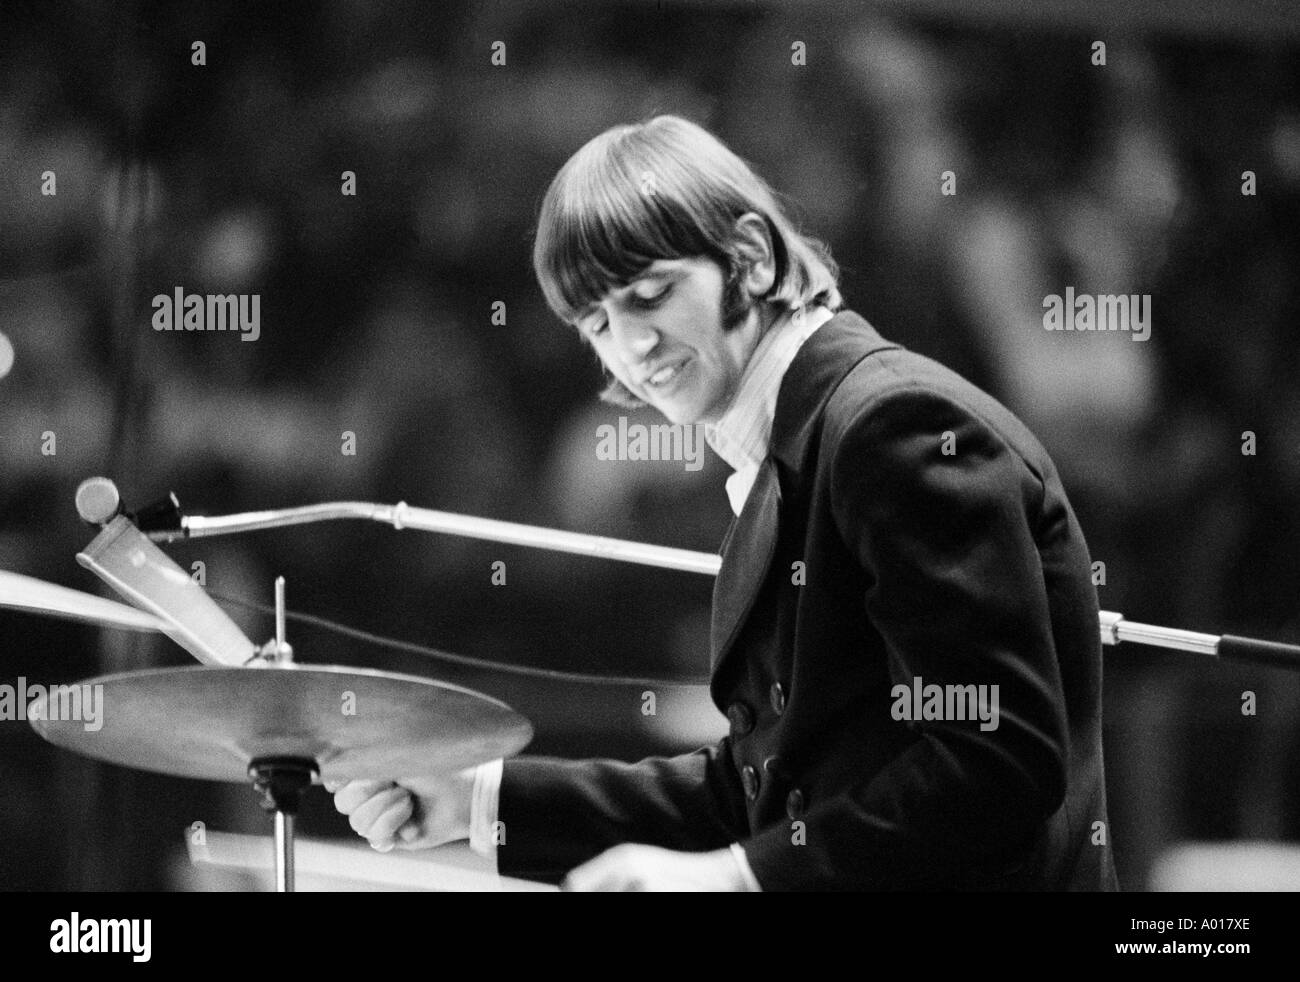 The Beatles, concert in Essen, Ruhr area, Gruga Hall, 1966, 1960s, the sixties, England, London, Great Britain, British pop band, music, musician, group, pop music, singers, Ringo Starr, drums, b&w, black and white, black & white photography Stock Photo